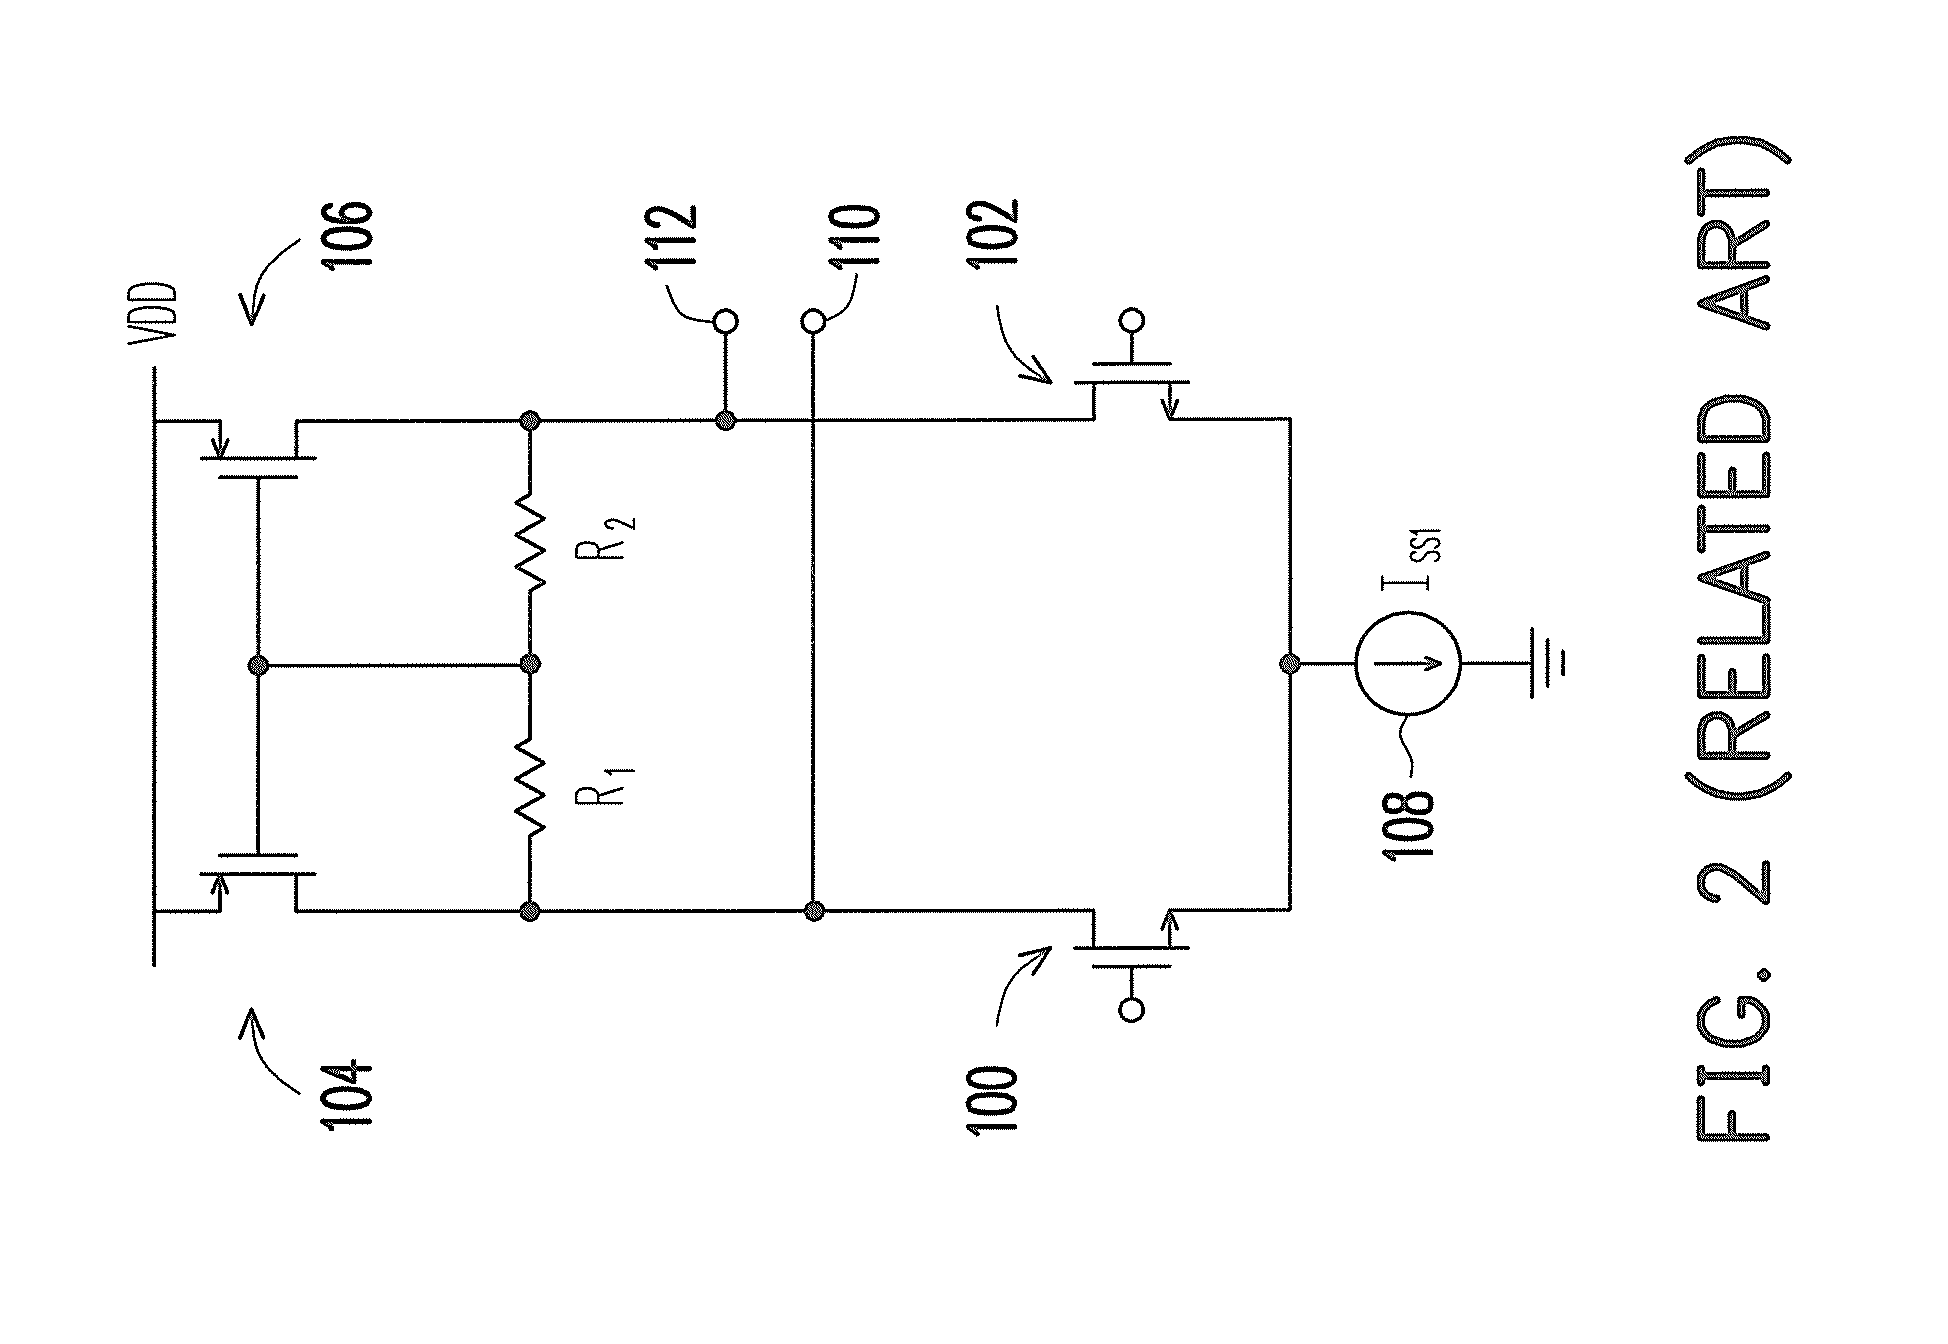 Differential amplifier